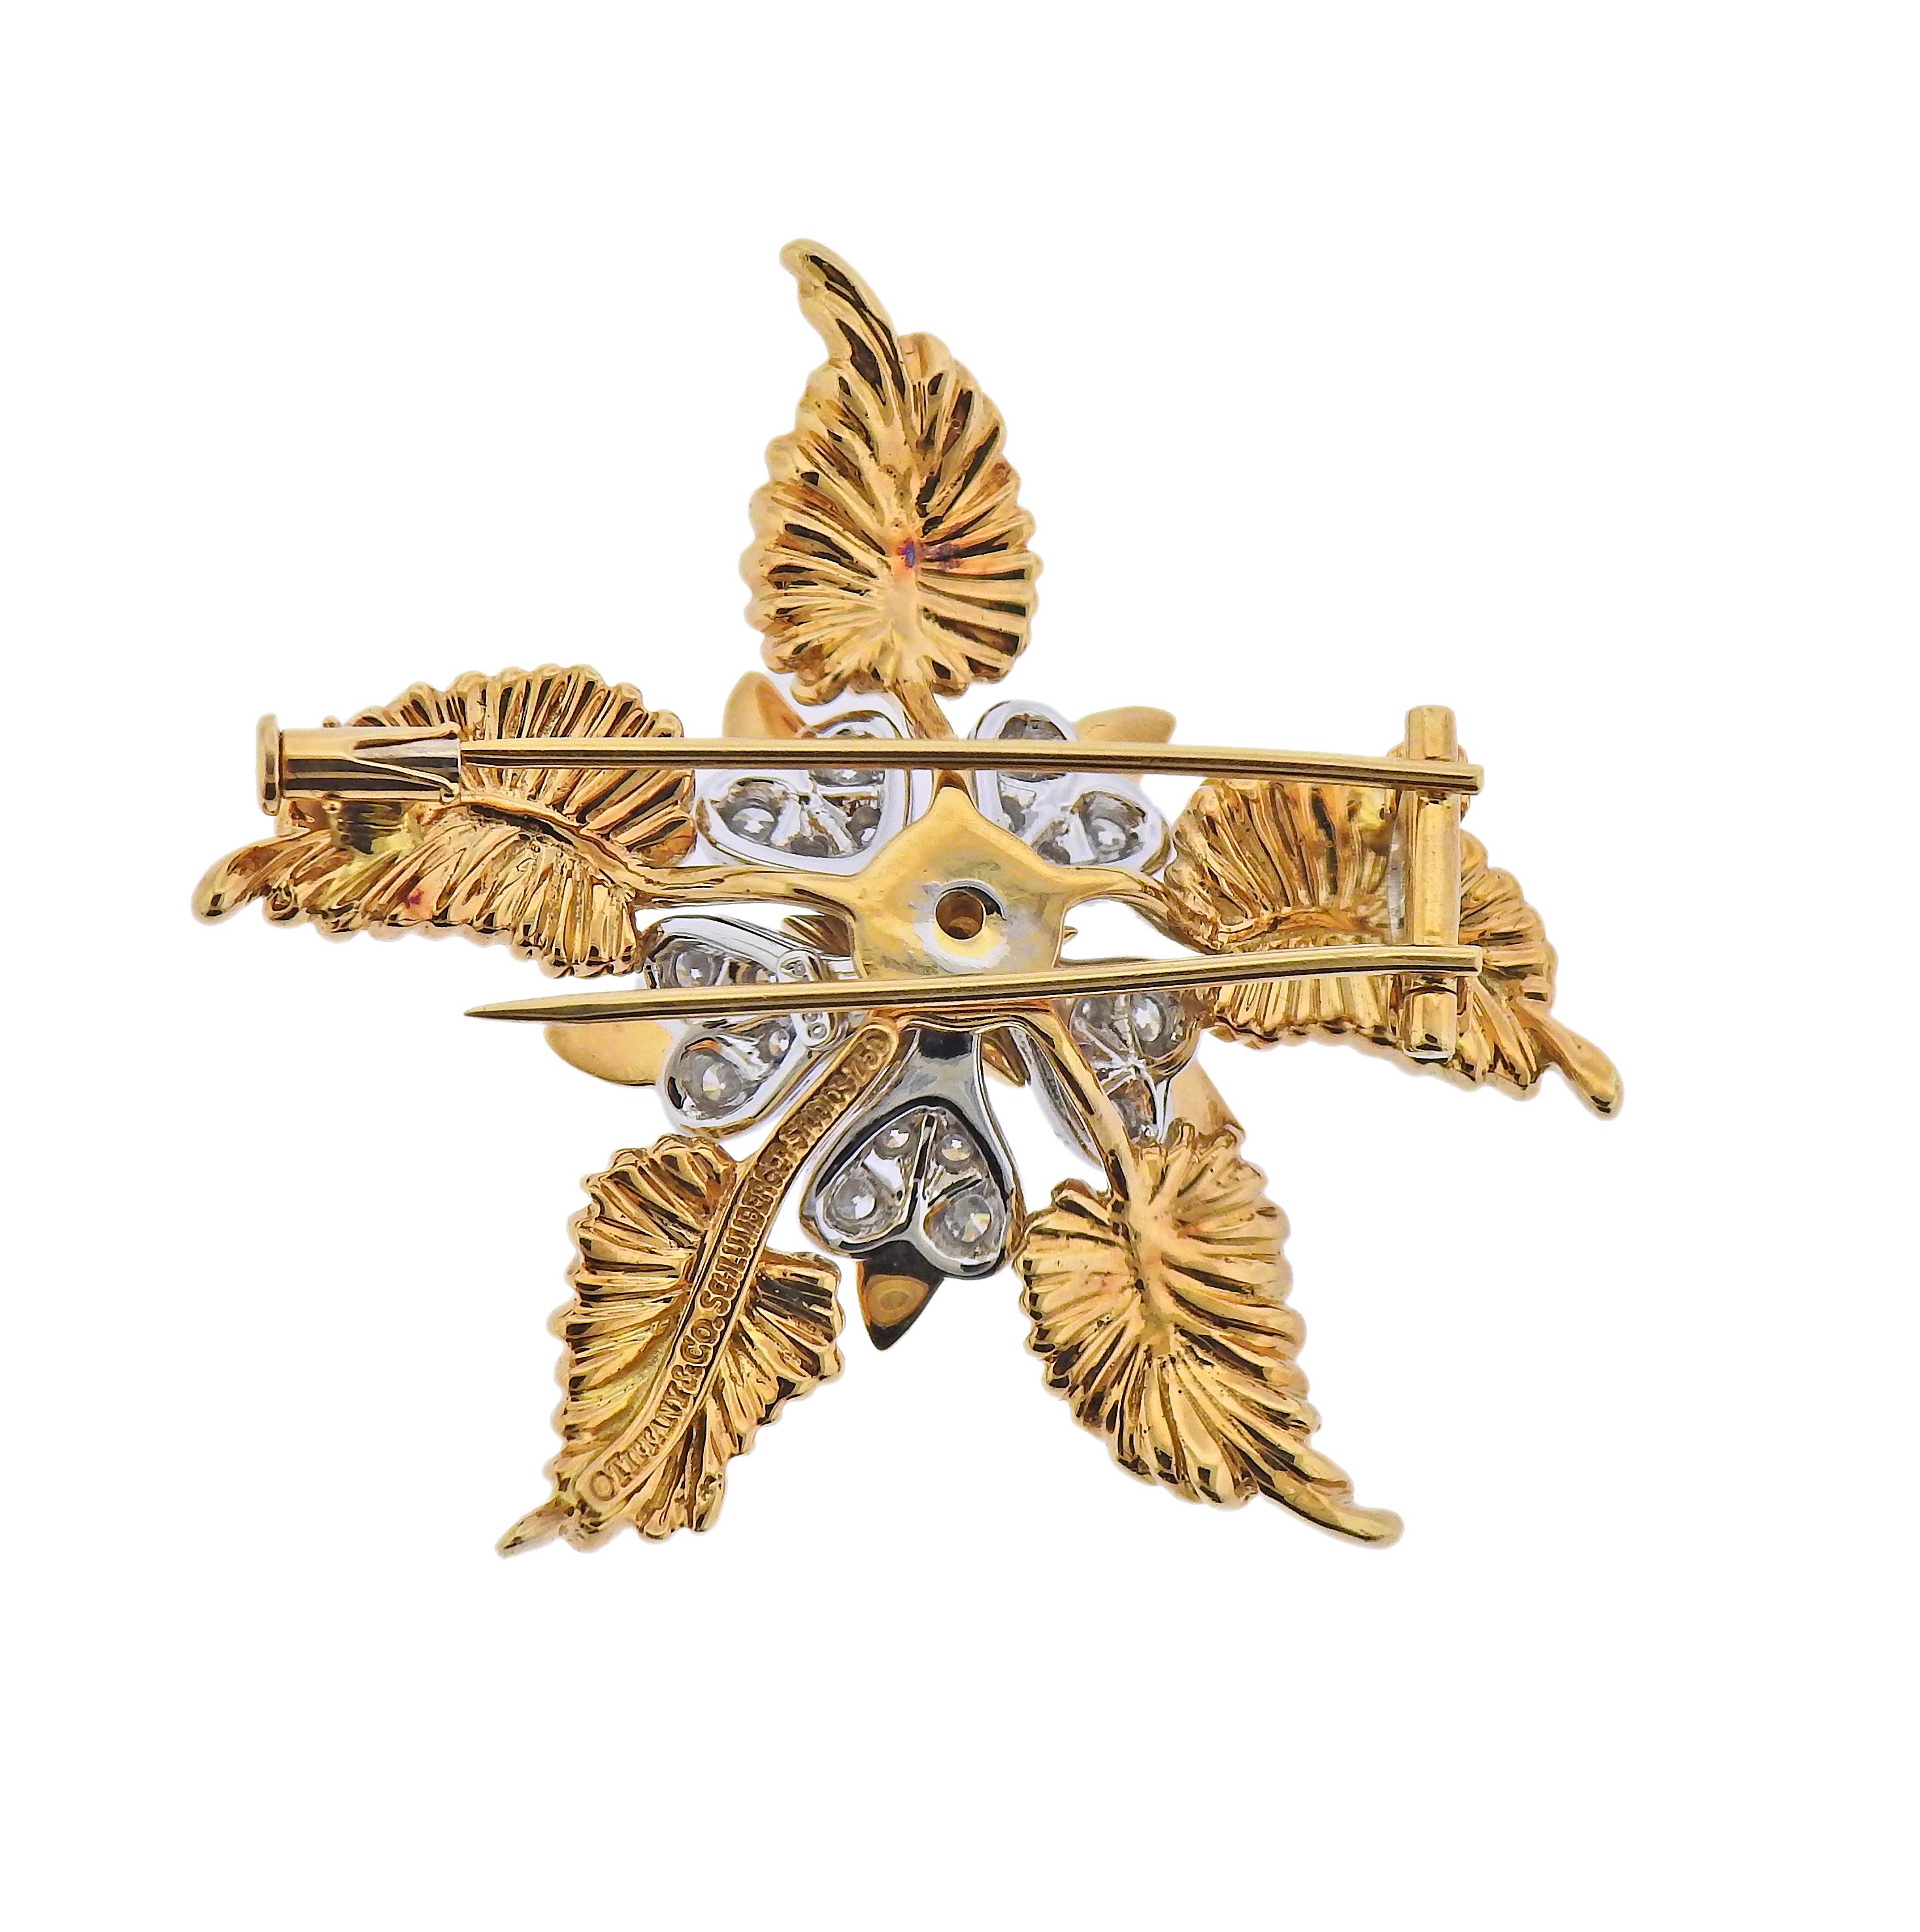 18k gold and platinum brooch, by Jean Schlumberger for Tiffany & Co, adorned with approx. 1.20ctw in diamonds. Brooch is 44mm x 45mm. Marked: Tiffany & Co, Schlumberger, 750, pt950. Weight - 25.2 grams.